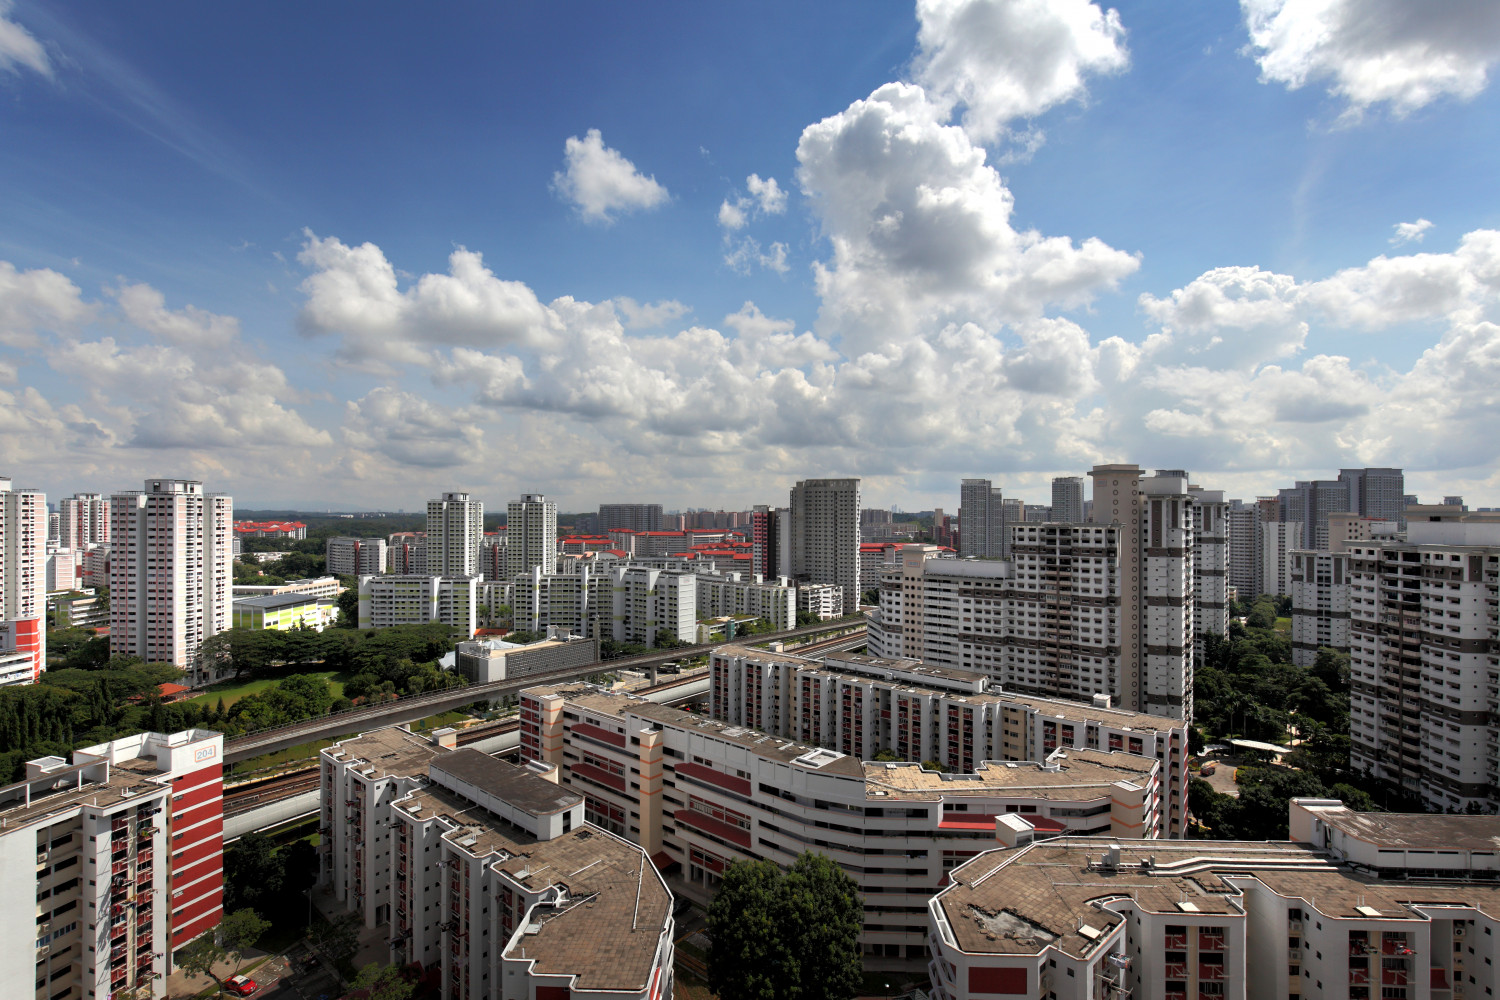 ANALYSIS: Which town has the cheapest HDB flats? - Property News